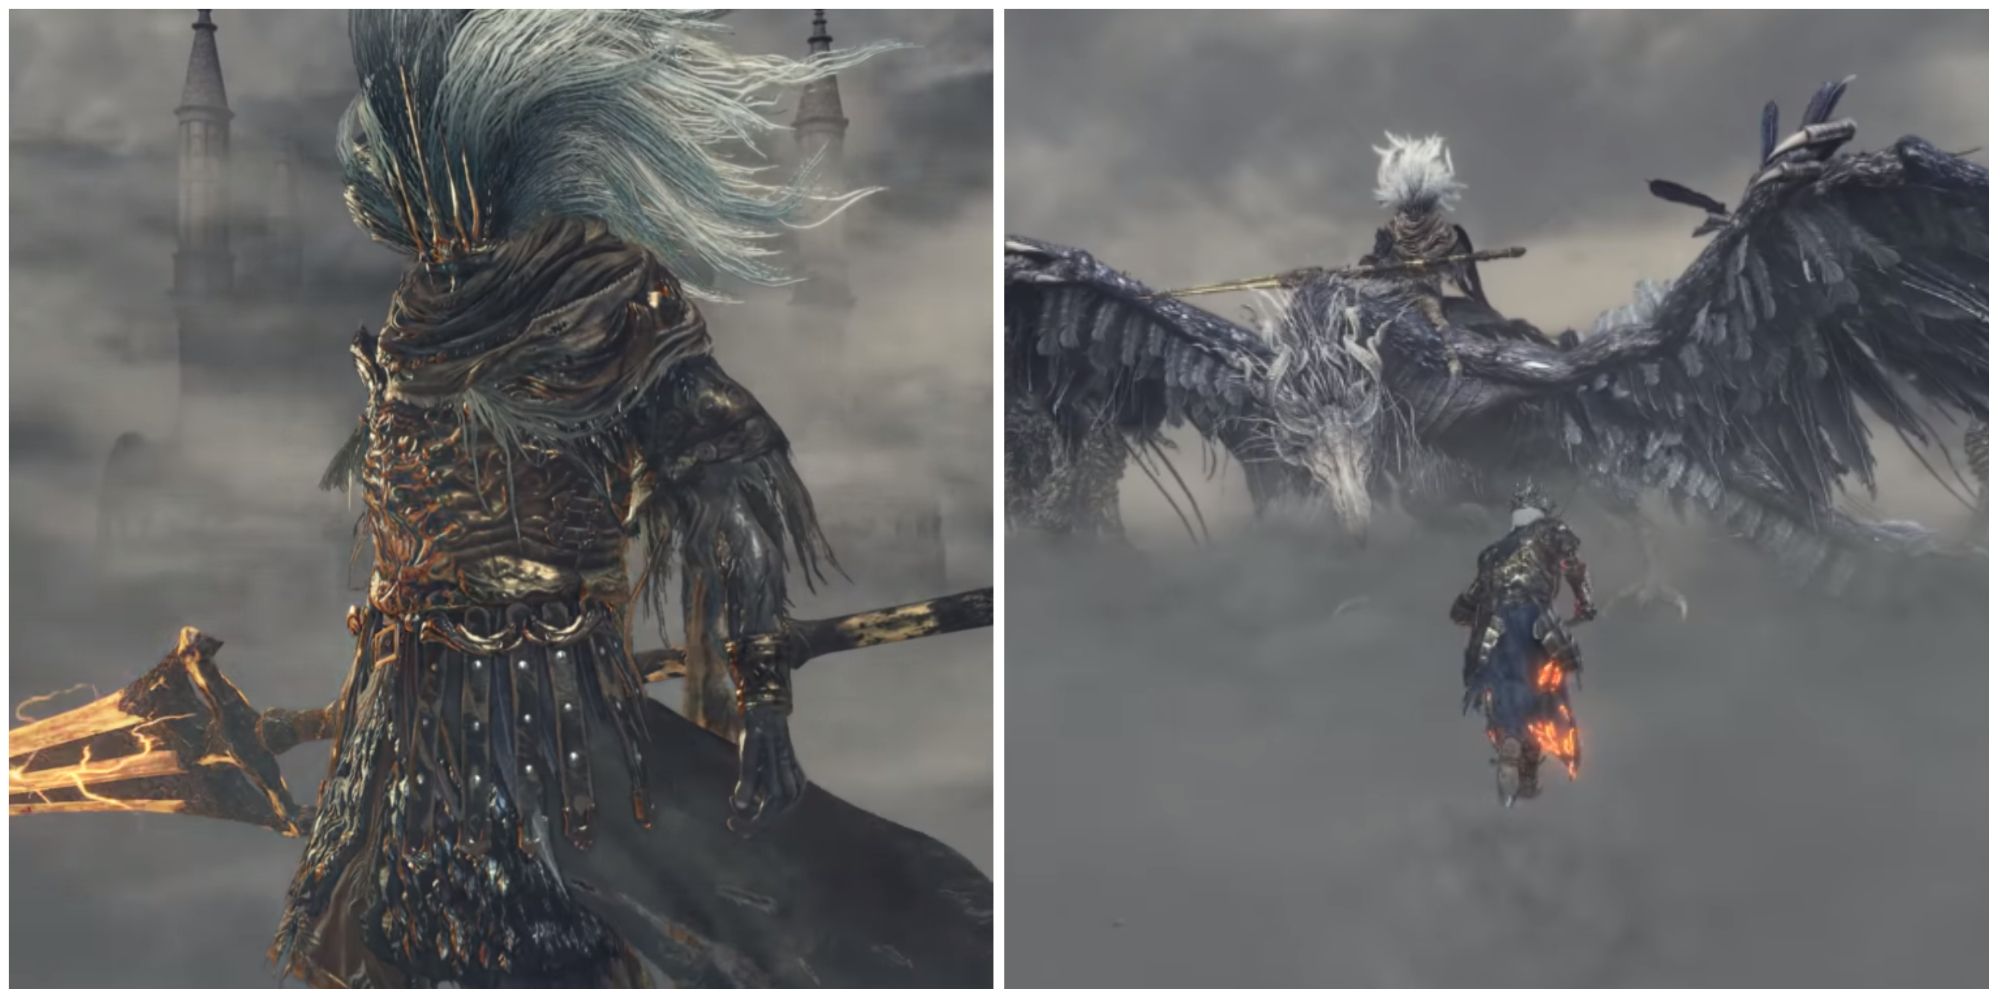 Split Images showing the Nameless King.